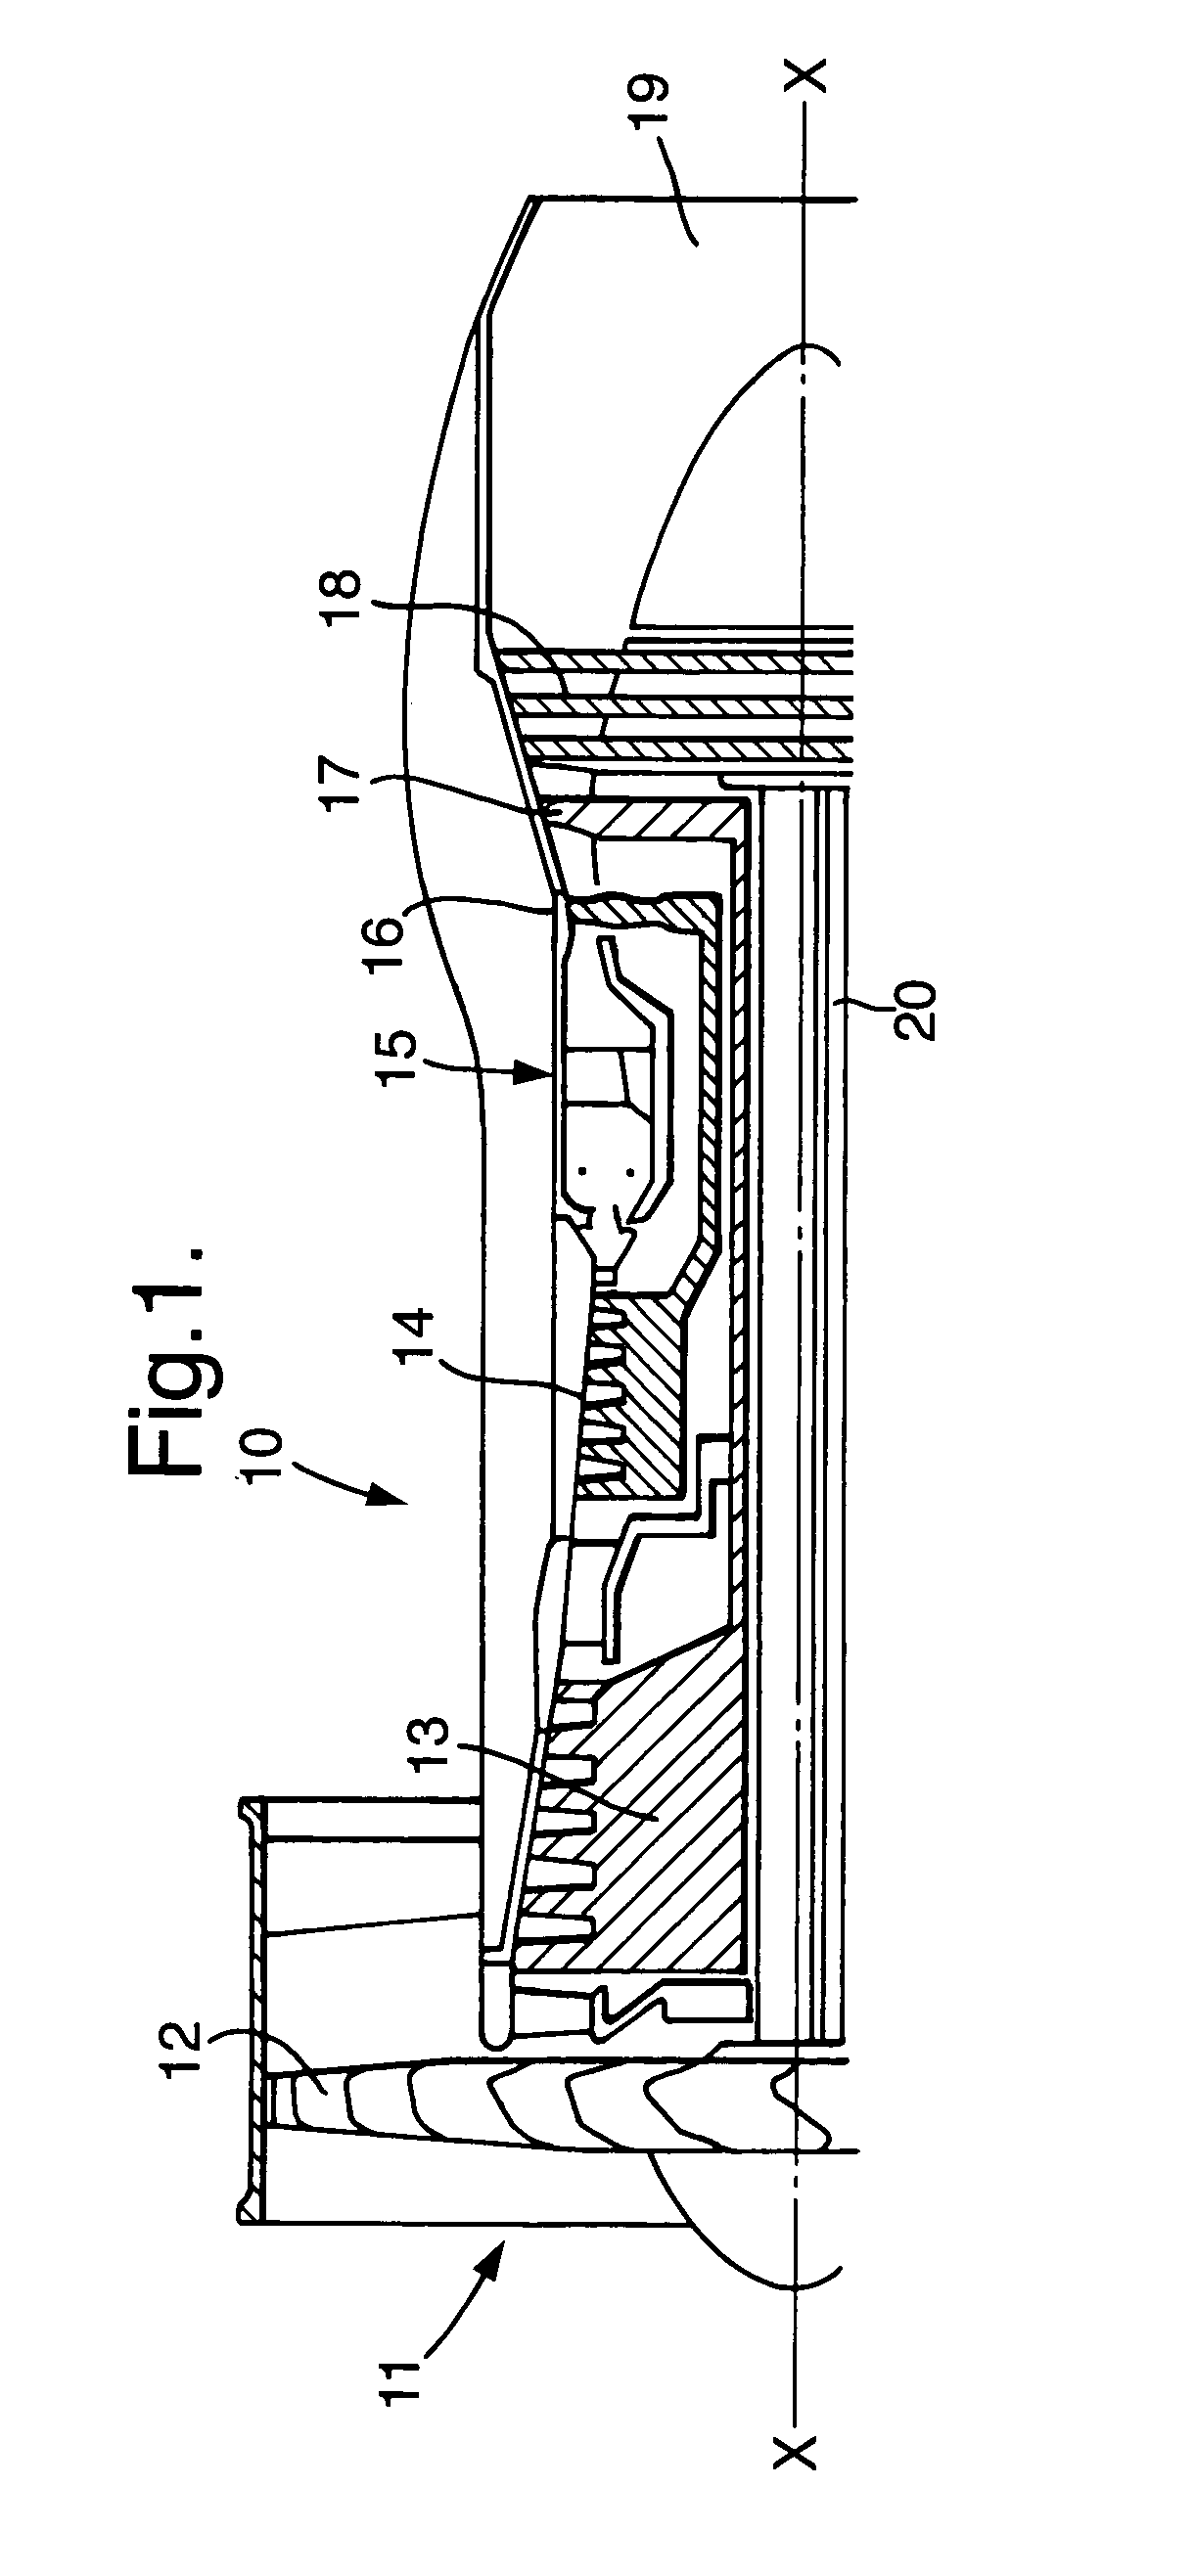 Cantilevered stator stage